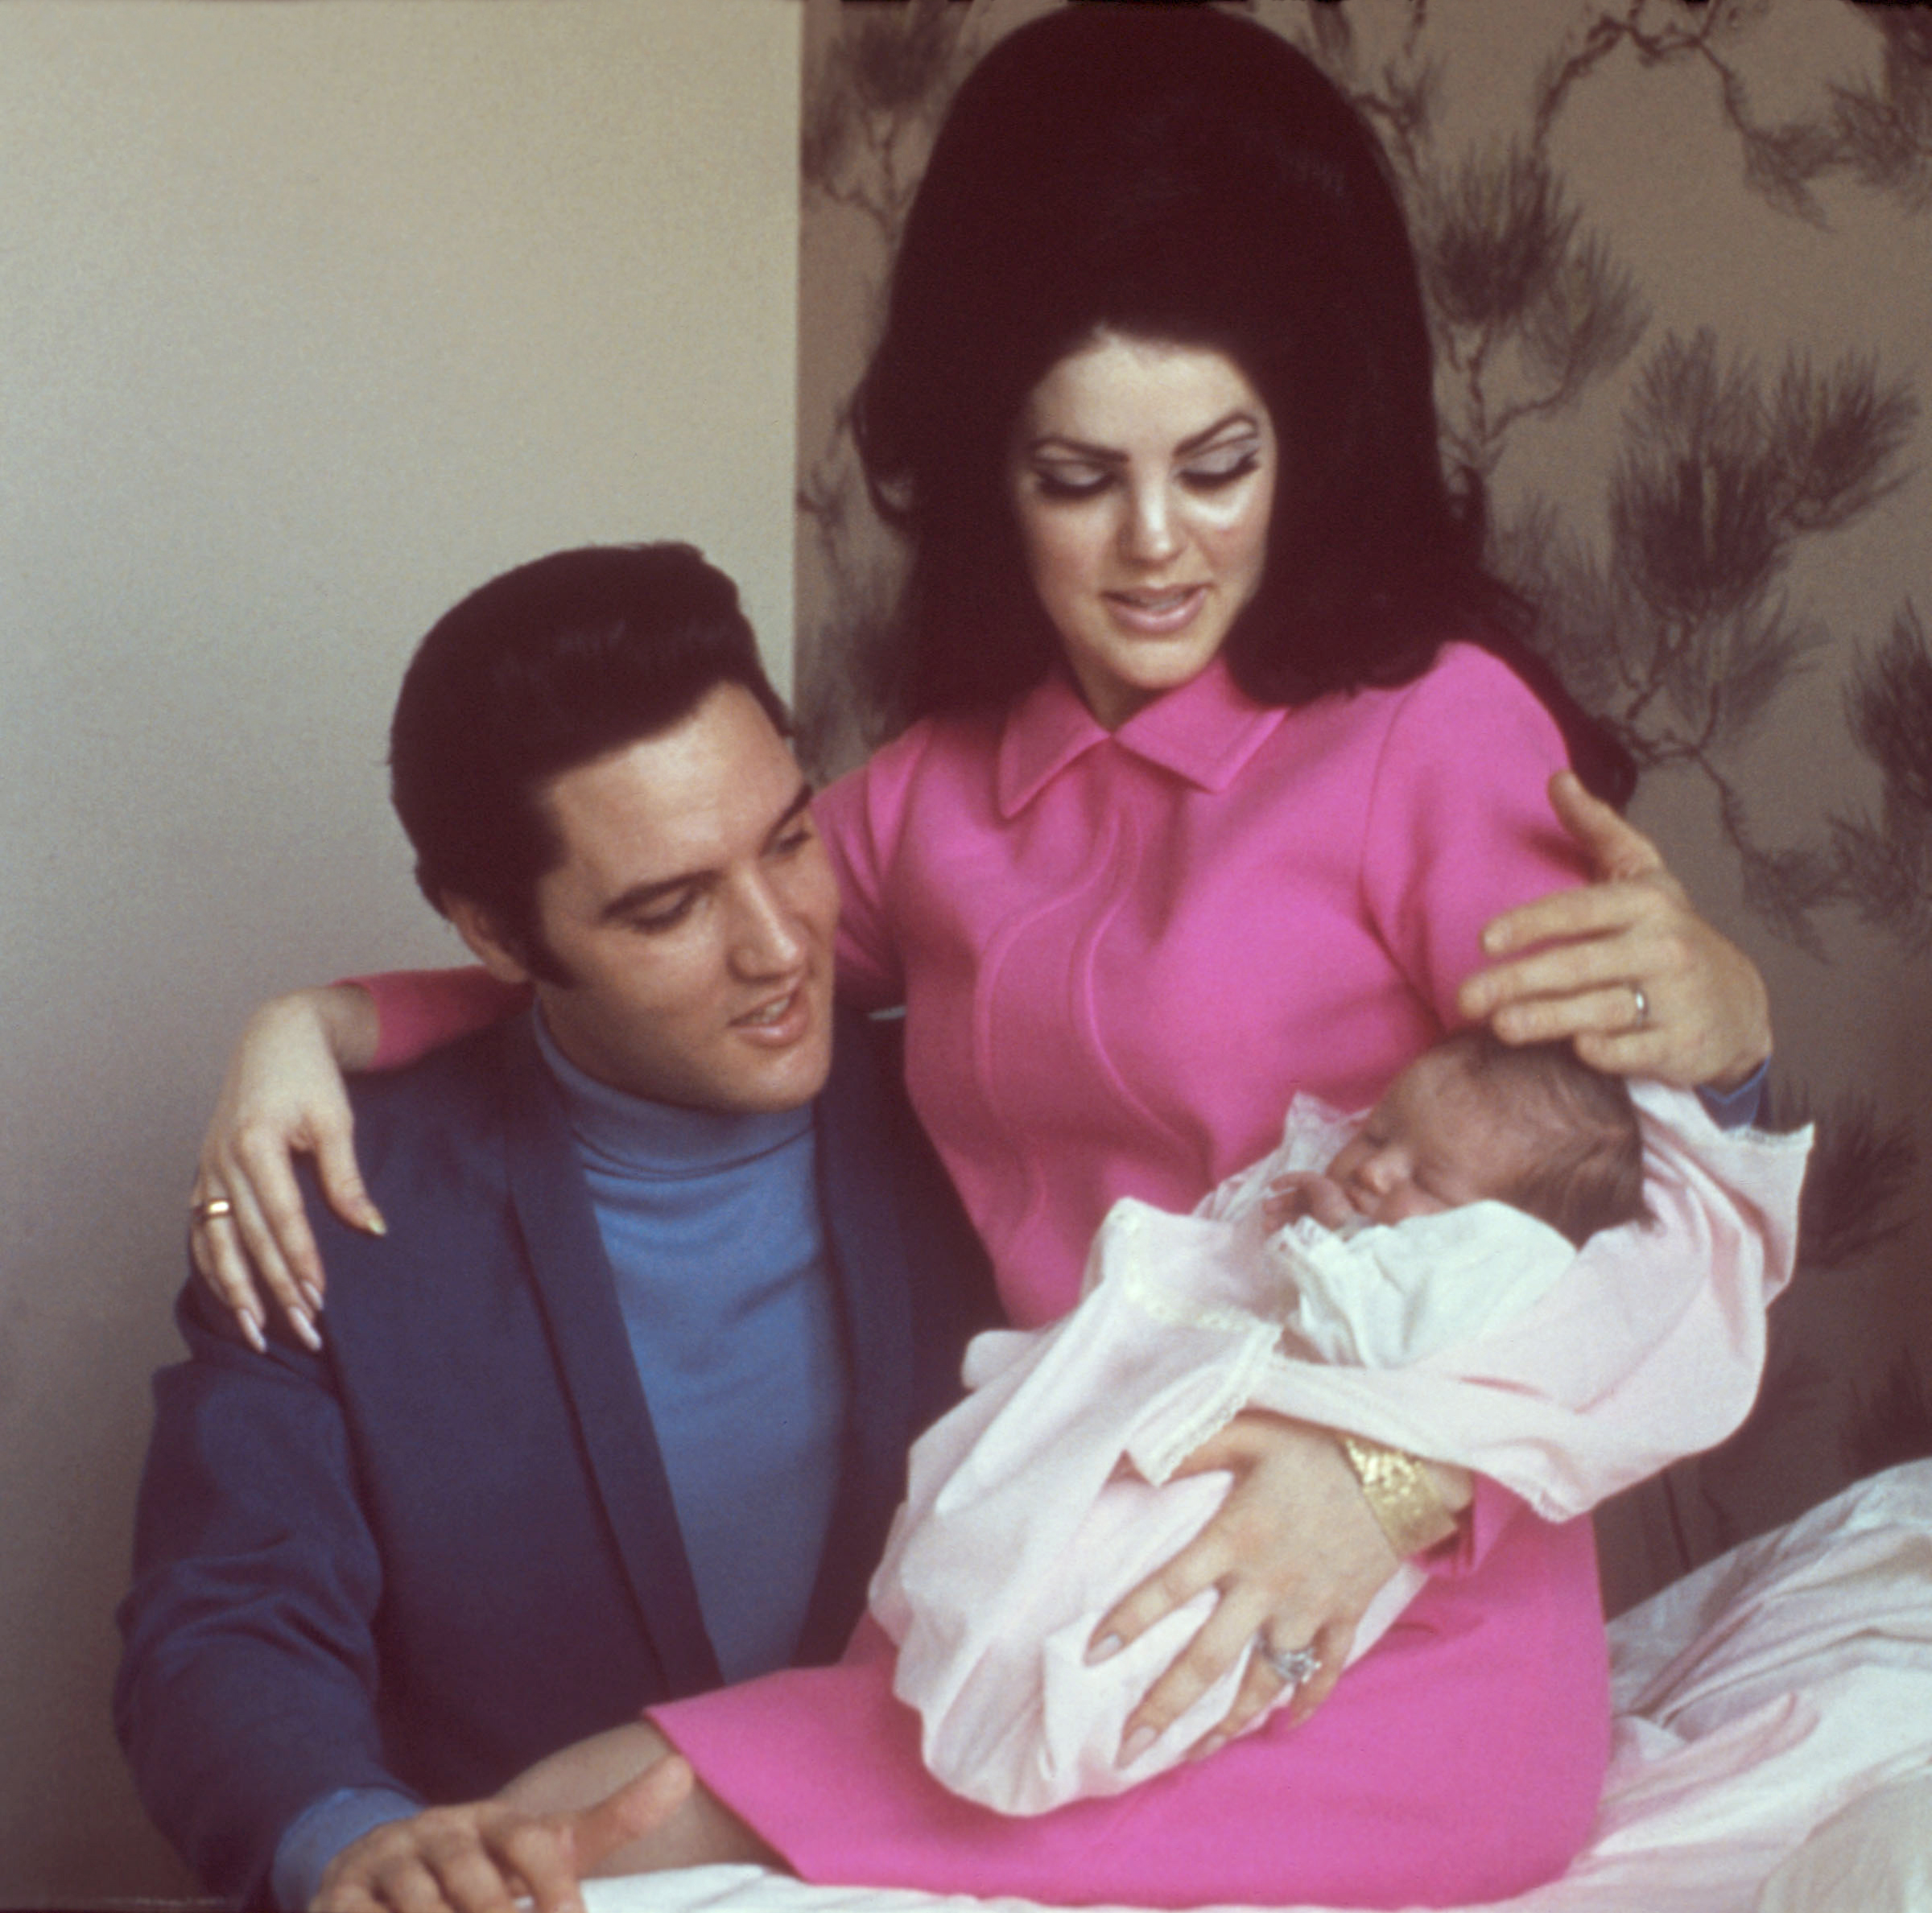 Elvis, Priscilla, and Lisa-Marie Presley at home on February 5, 1968 in Memphis, Tennessee | Source: Getty Images